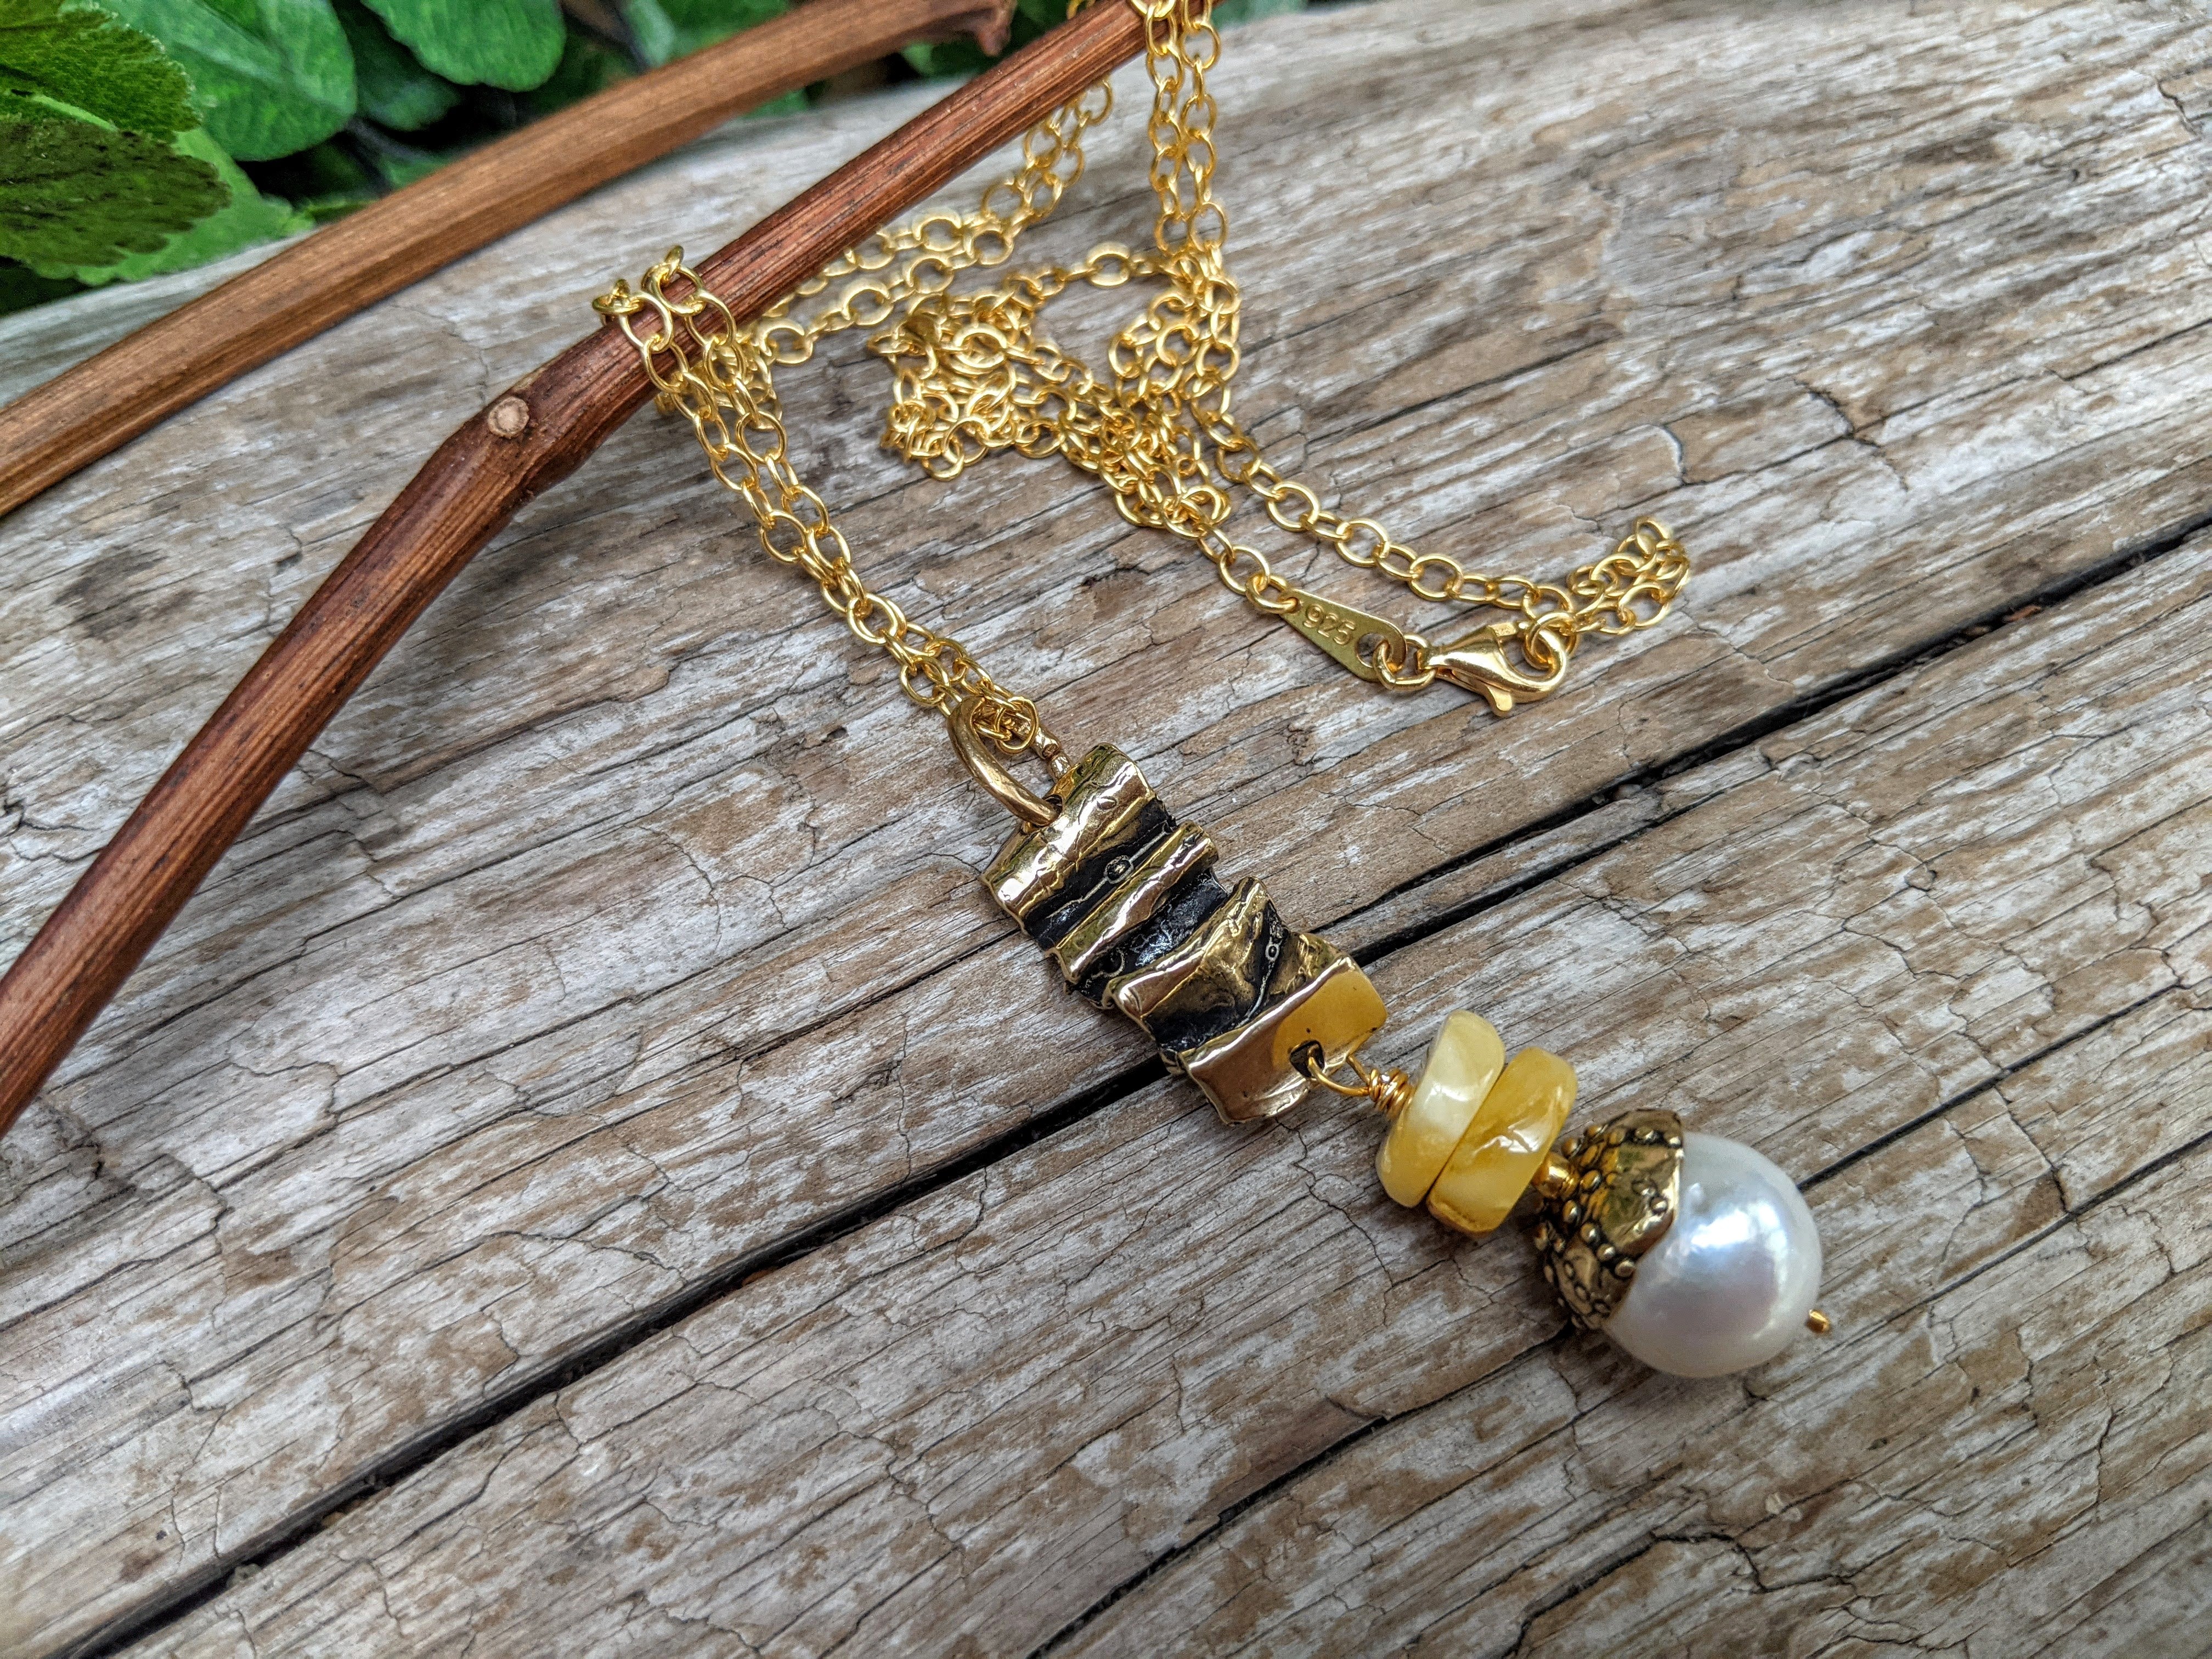 Amber pendant gold filled silver chain necklace. Big Edison pearl pendant. Handcrafted by Aurora Creative Jewellery.